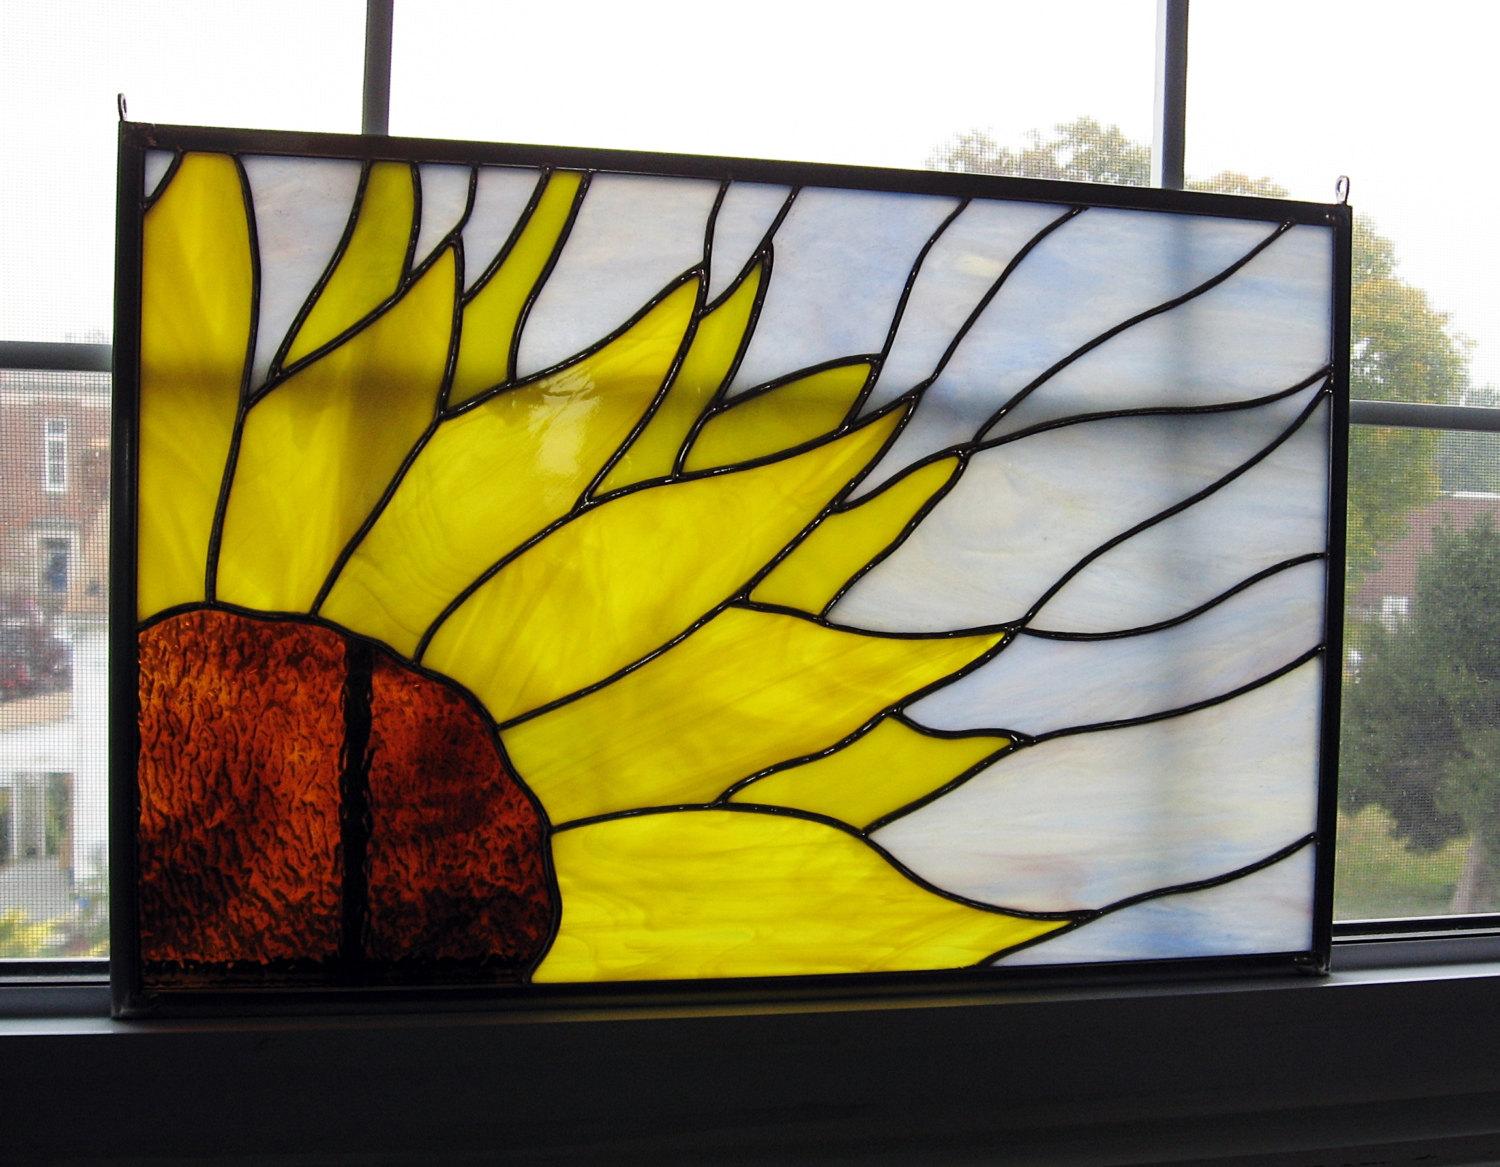 Sunflower Stained Glass Window Panel